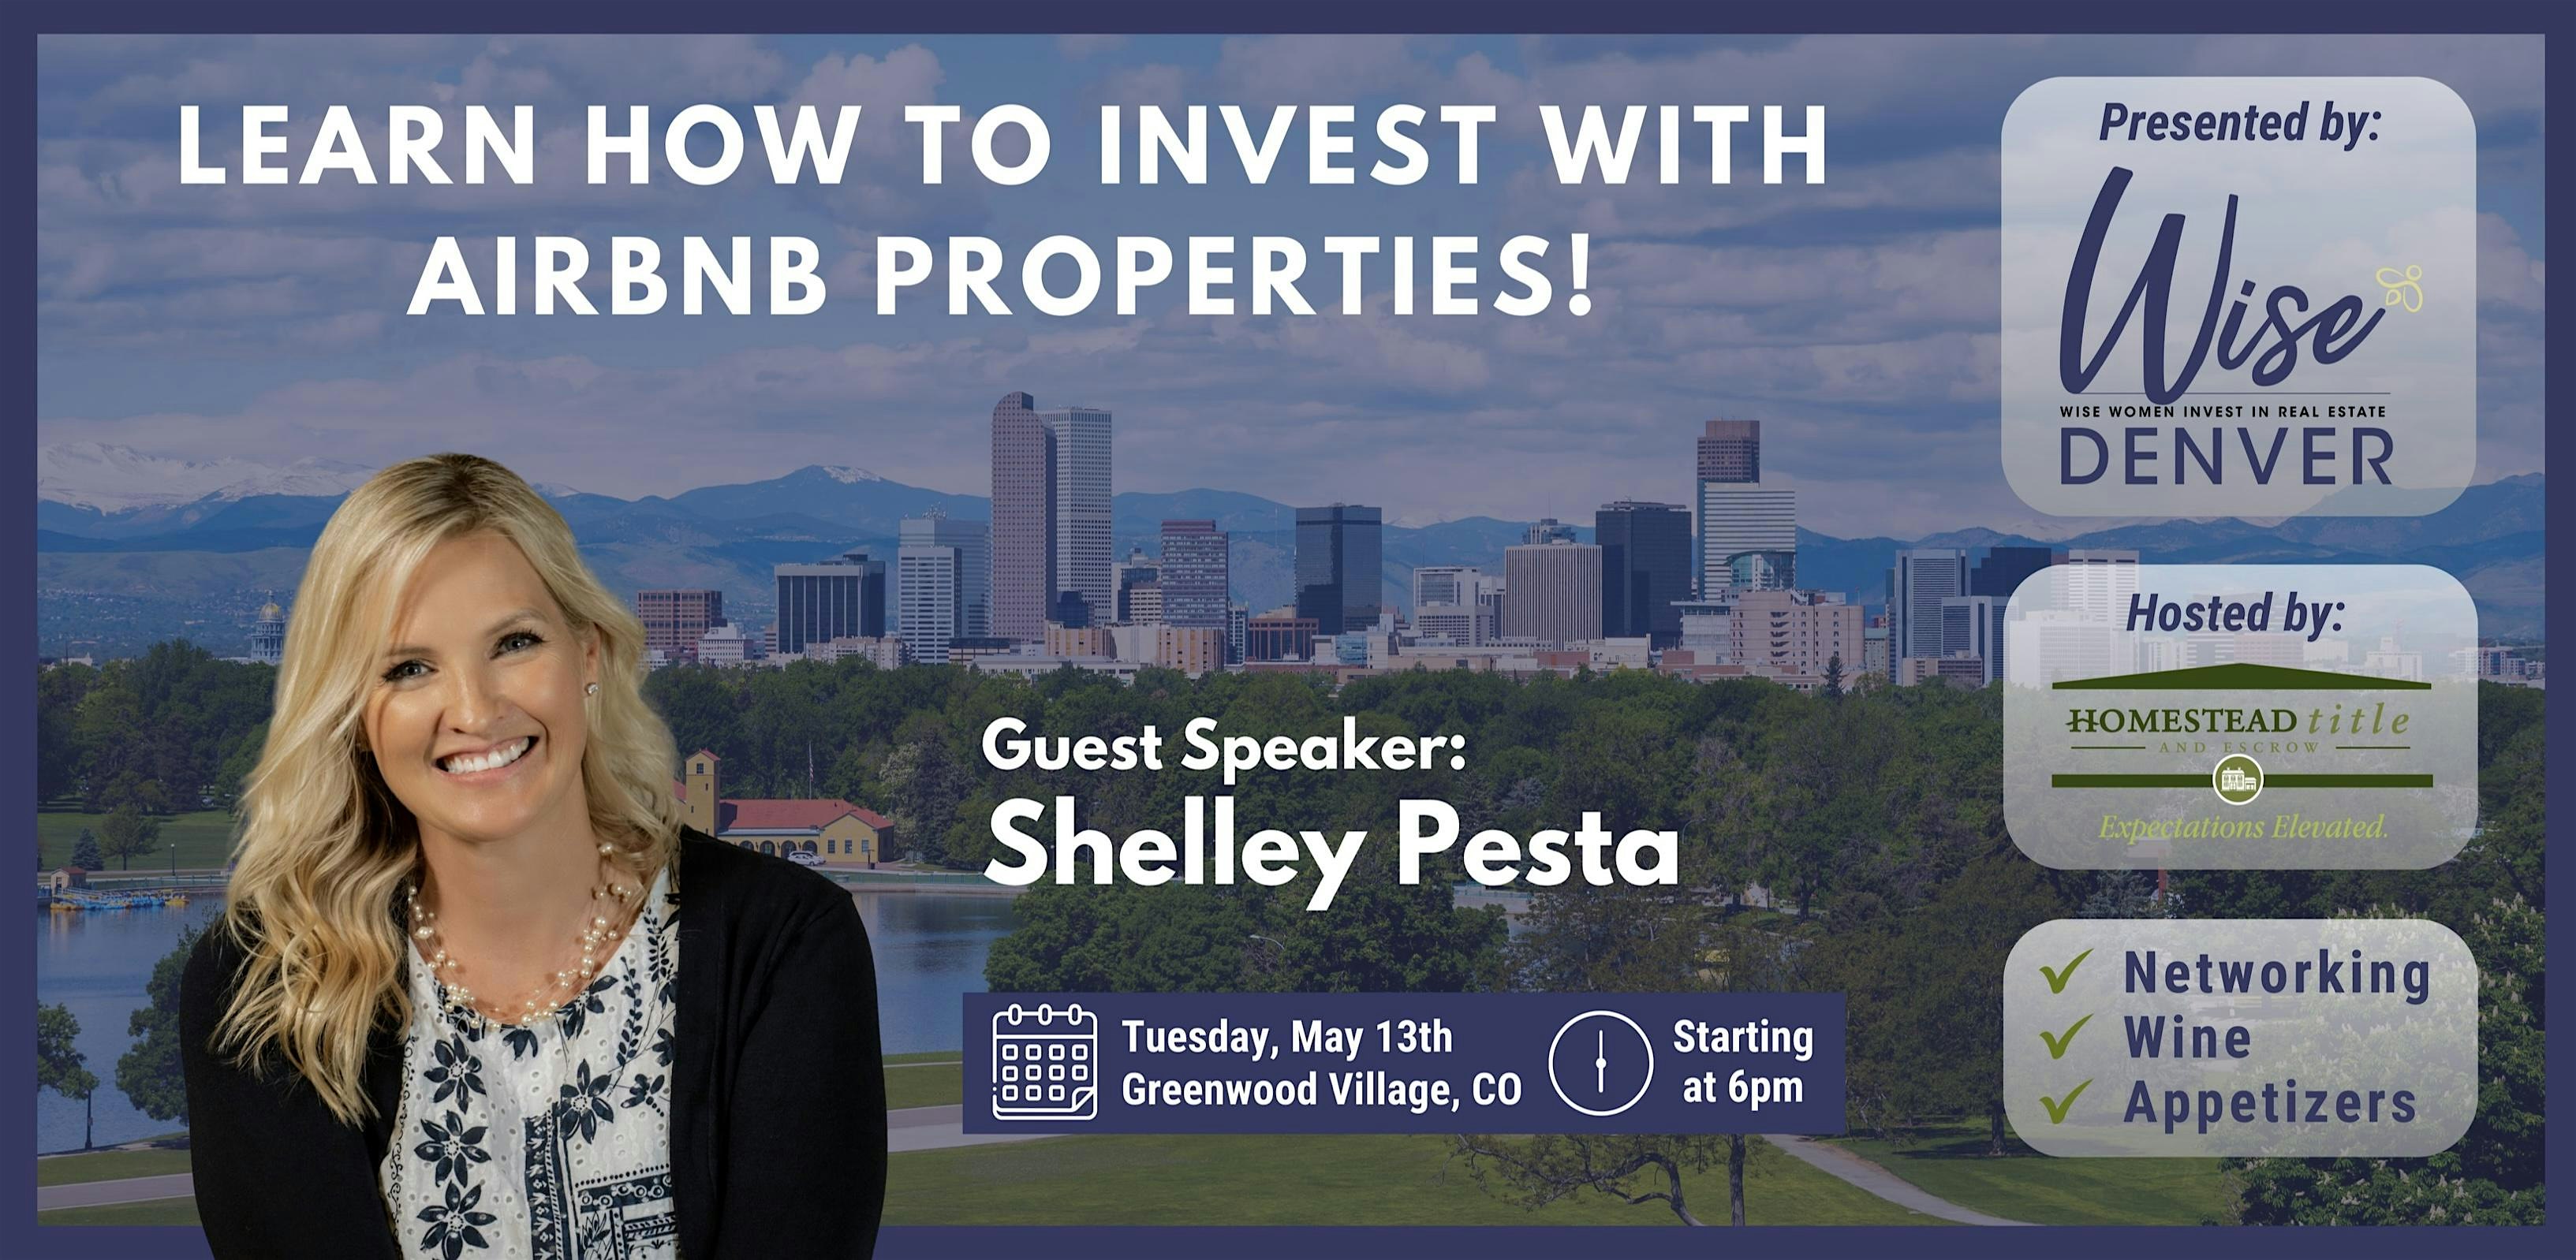 Wise Denver-Wise Women Invest in Real Estate Networking and Learning